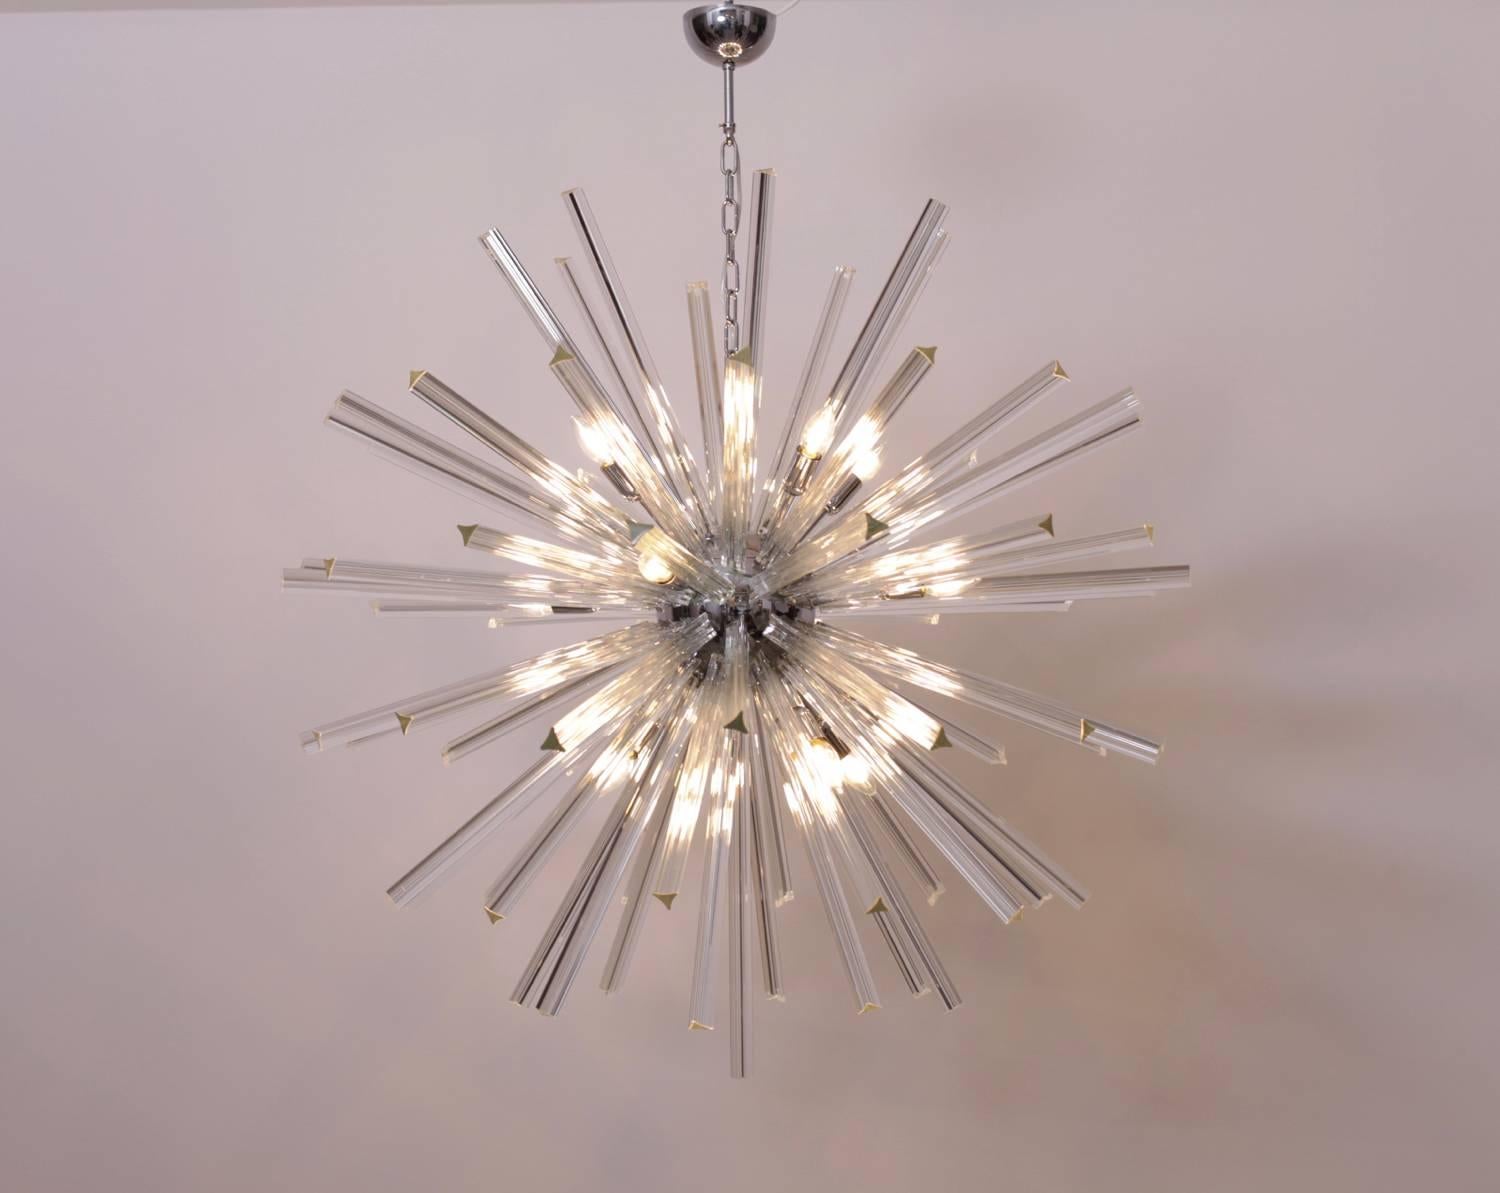 Extraordinary huge, iconic Murano glass chandelier in the manner of Venini. The chandelier is manufactures in high quality. It is a real eyecatcher. 12 x E14.
To be on the the safe side, the lamp should be checked locally by a specialist concerning